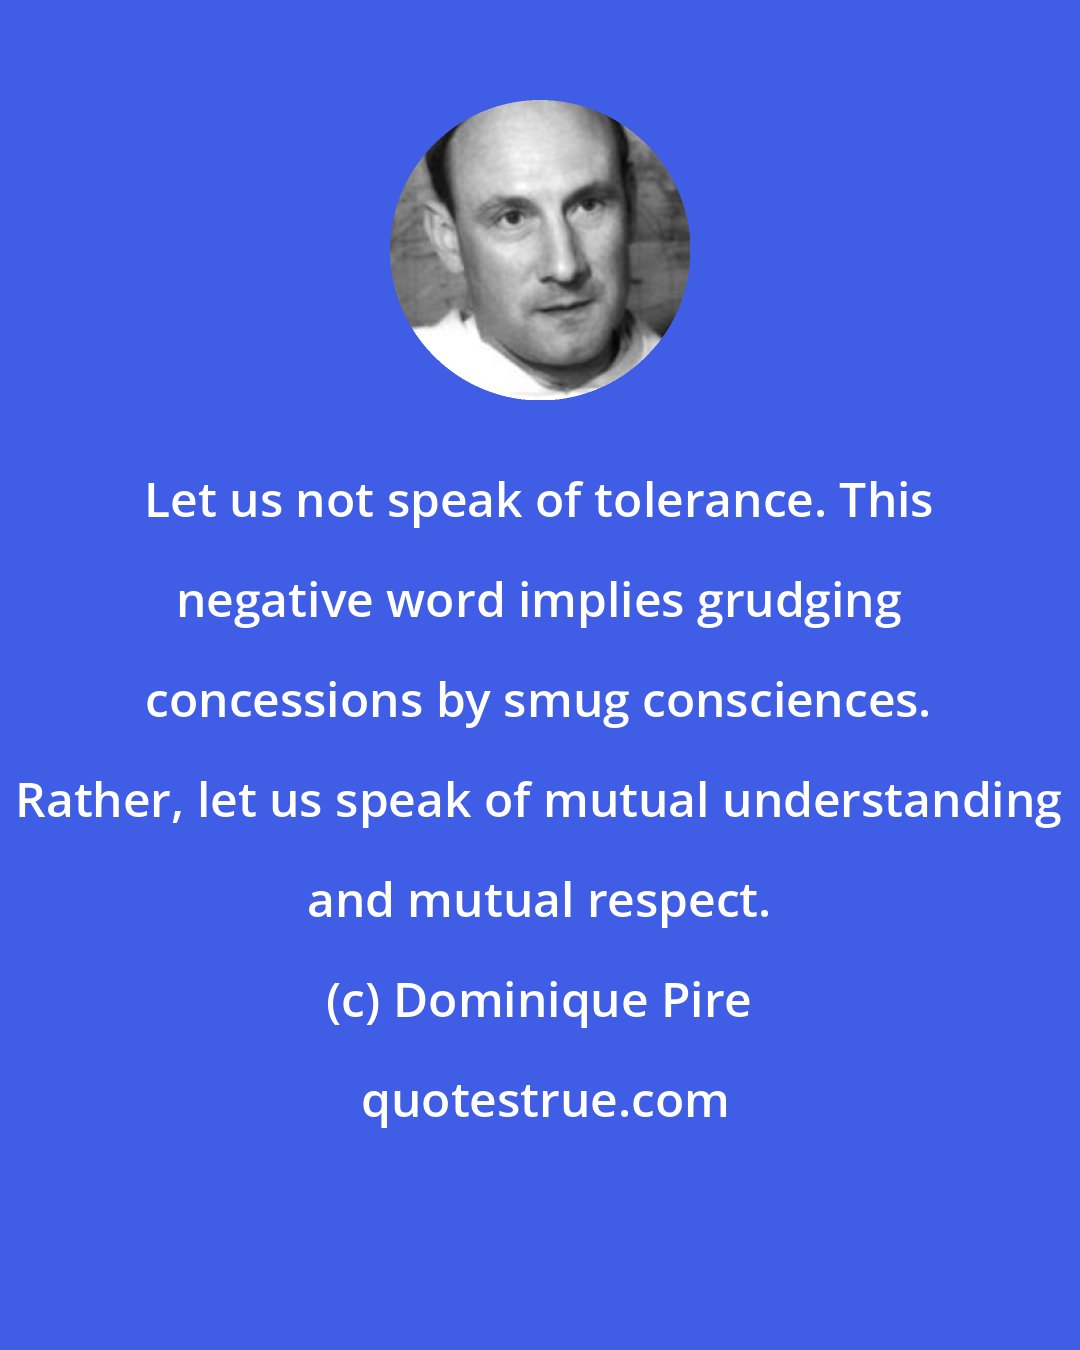 Dominique Pire: Let us not speak of tolerance. This negative word implies grudging concessions by smug consciences. Rather, let us speak of mutual understanding and mutual respect.